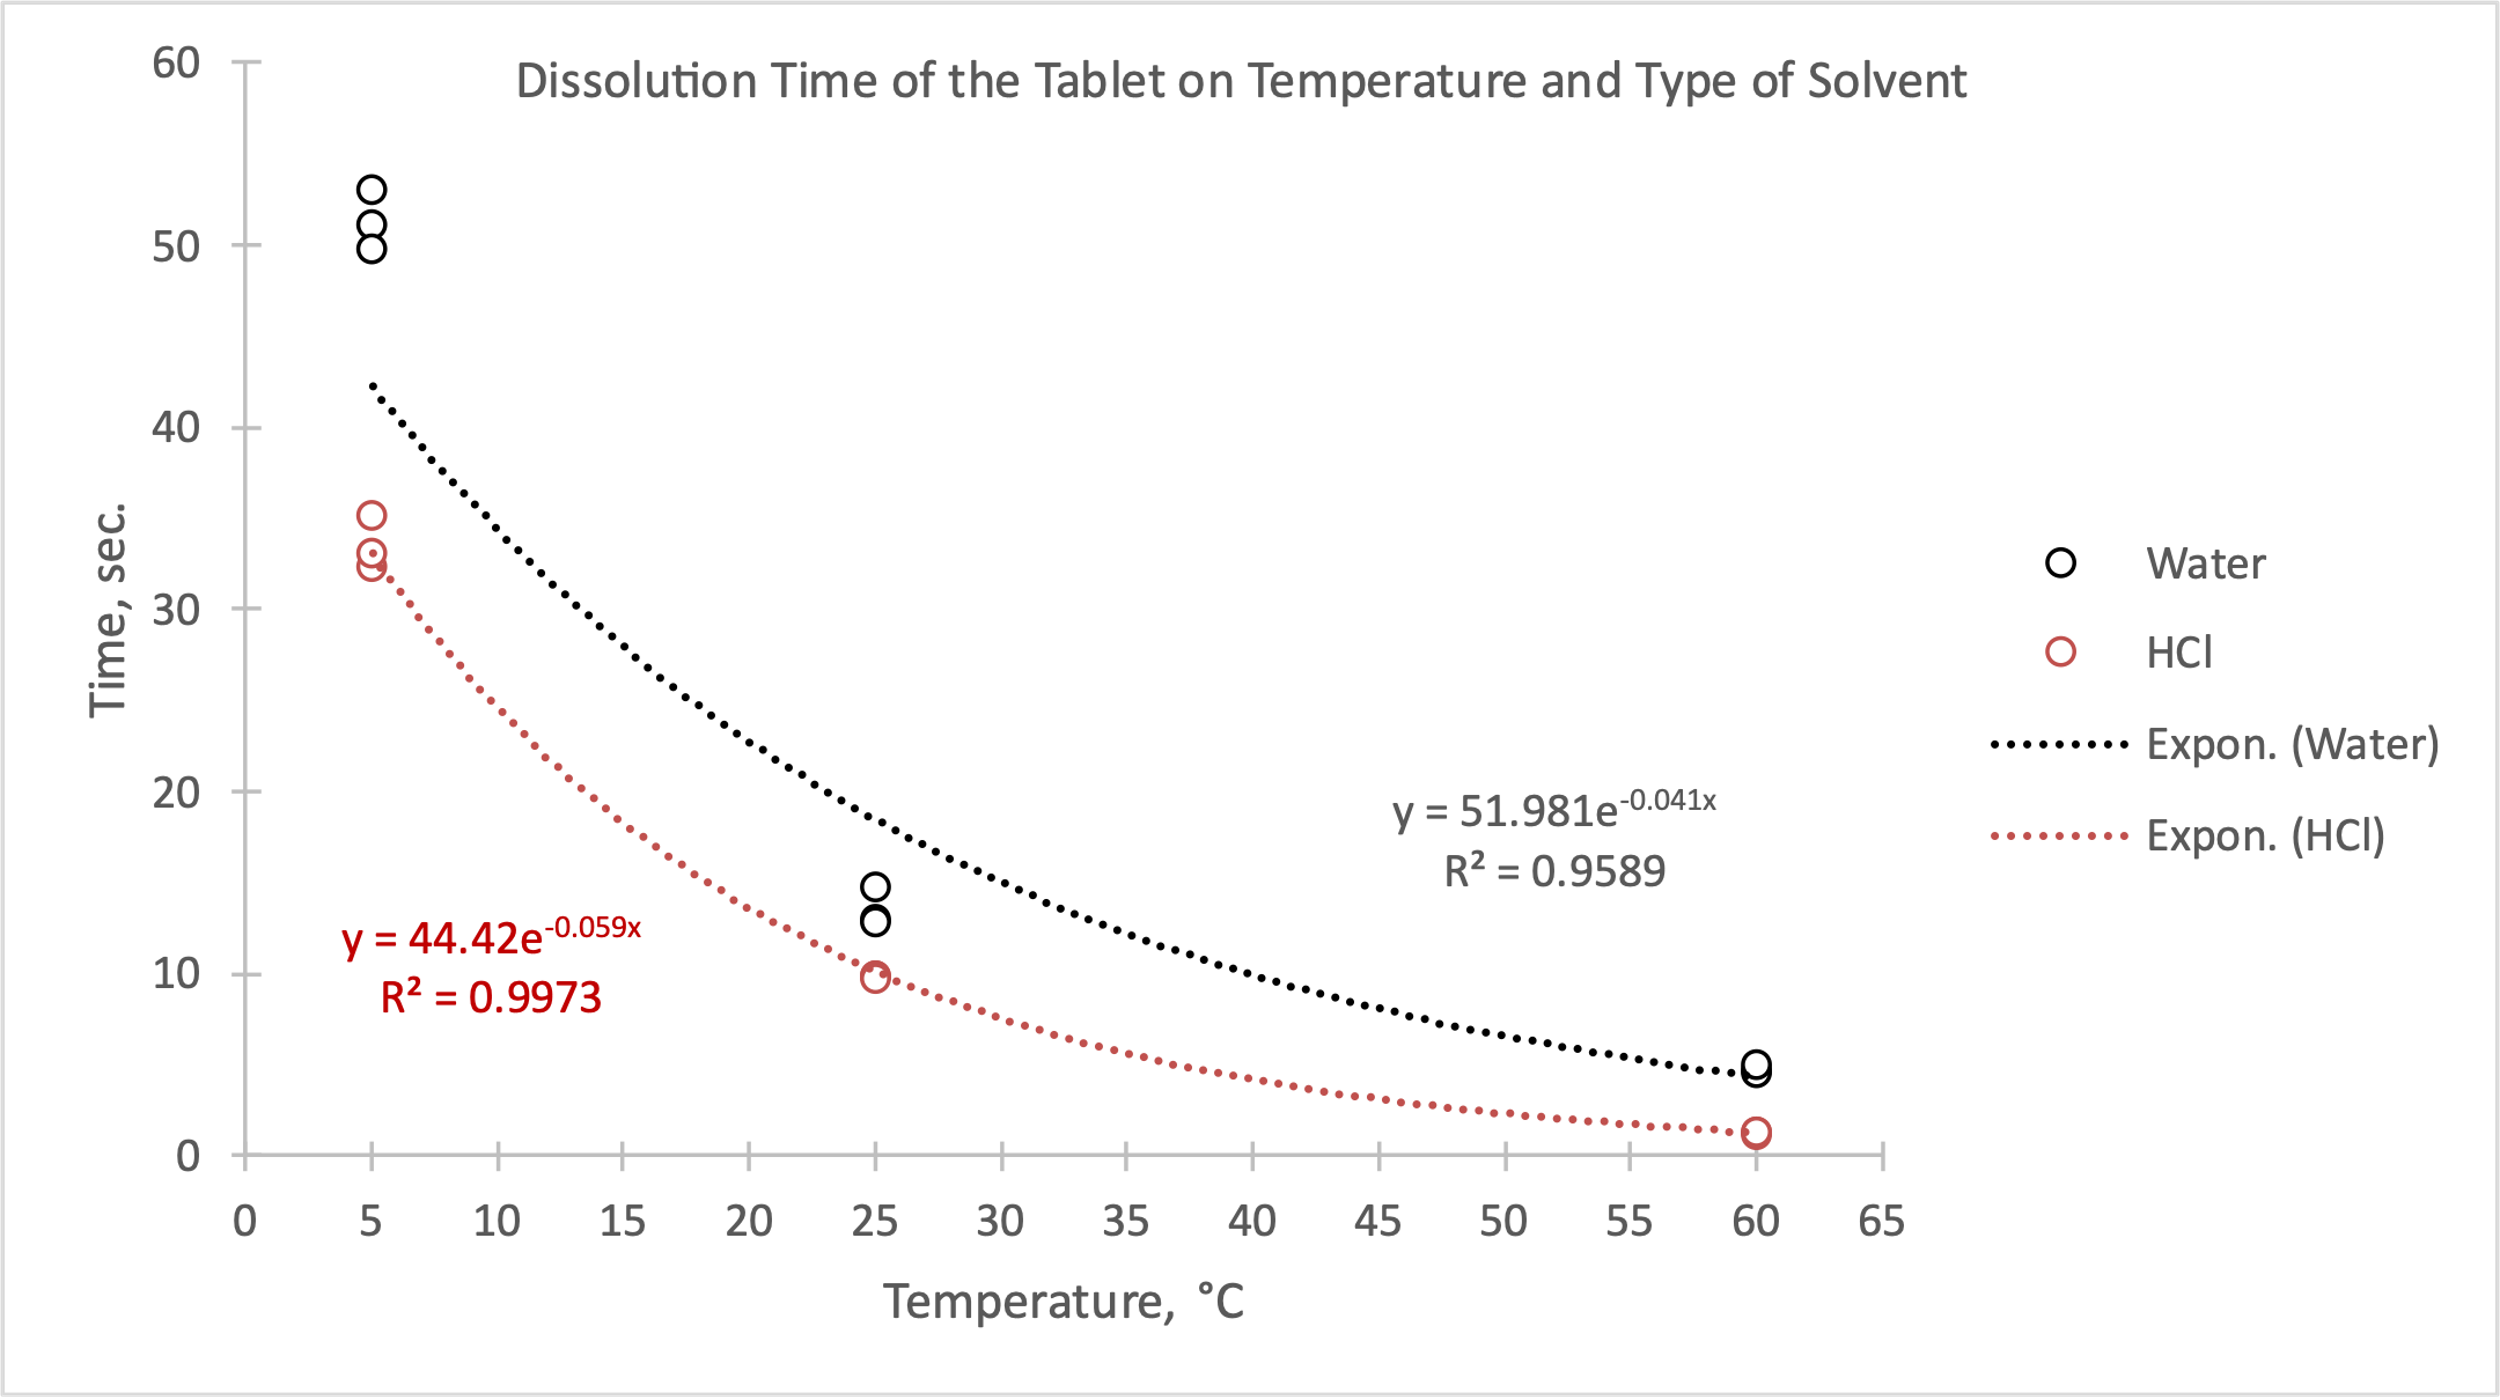 Dissolution Time of the Tablet on Temperature